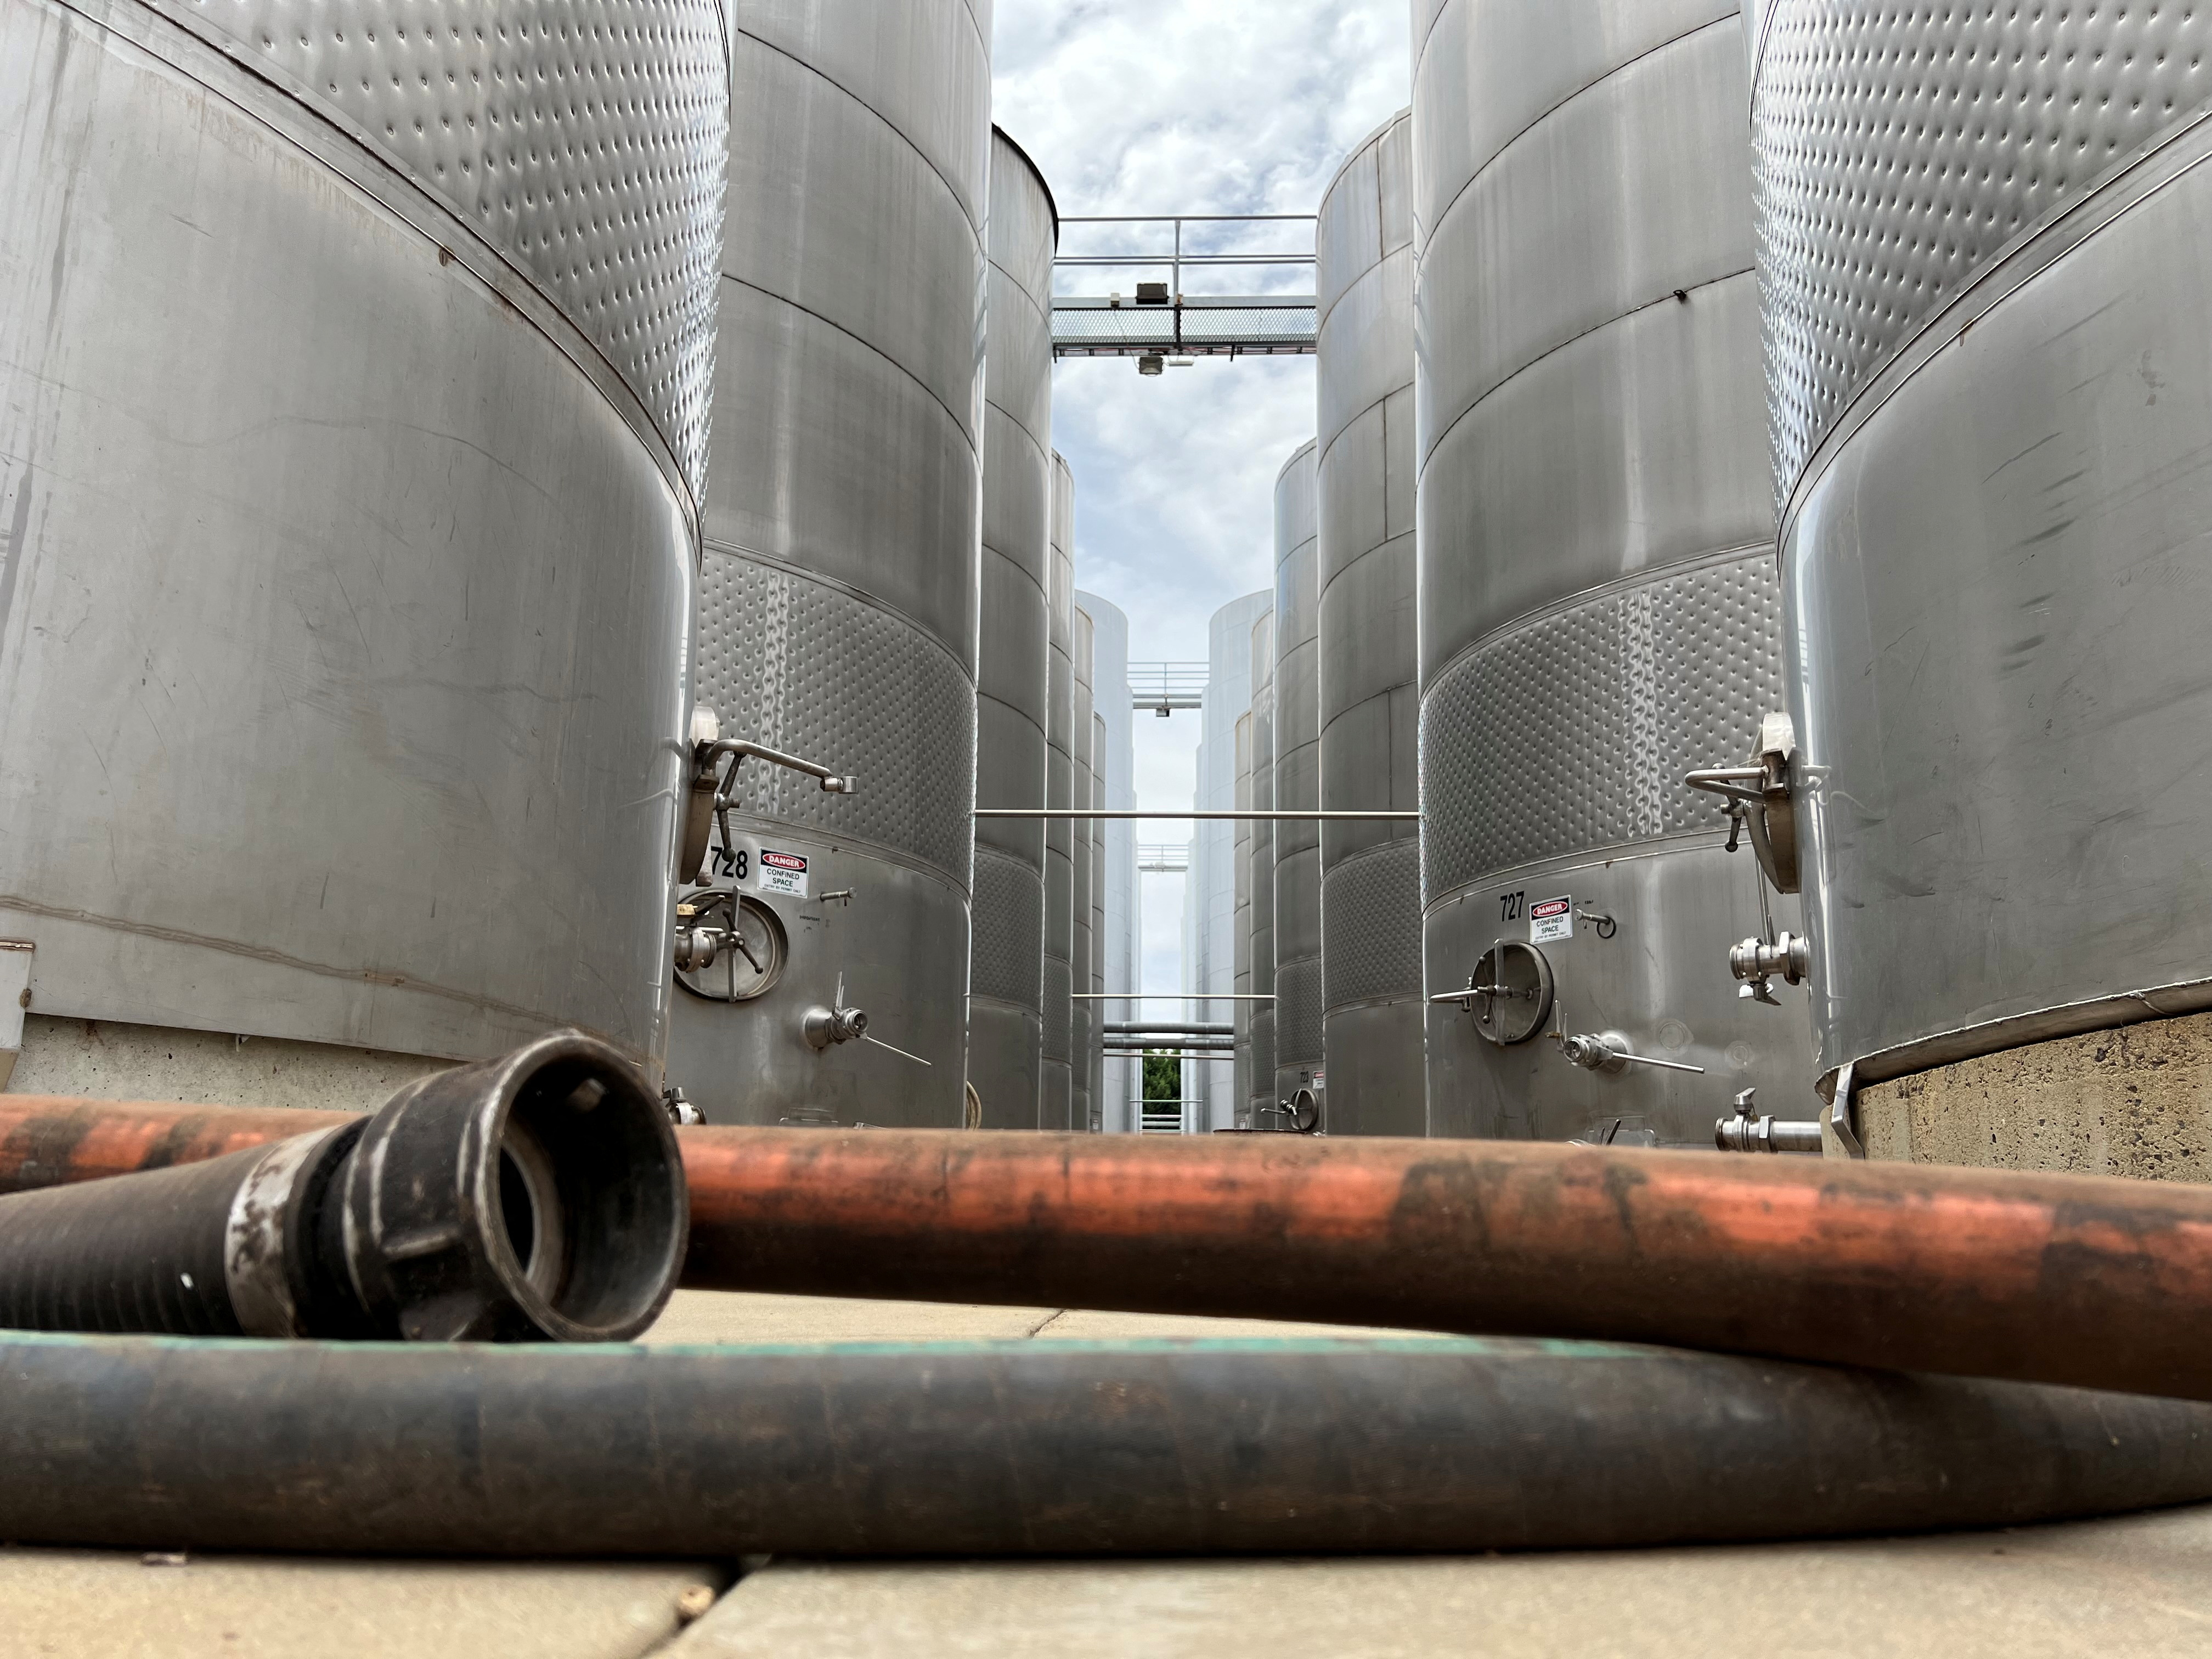 Wine storage tanks are pictured at a Calabria Wines facility in the town of Griffith in southeast Australia